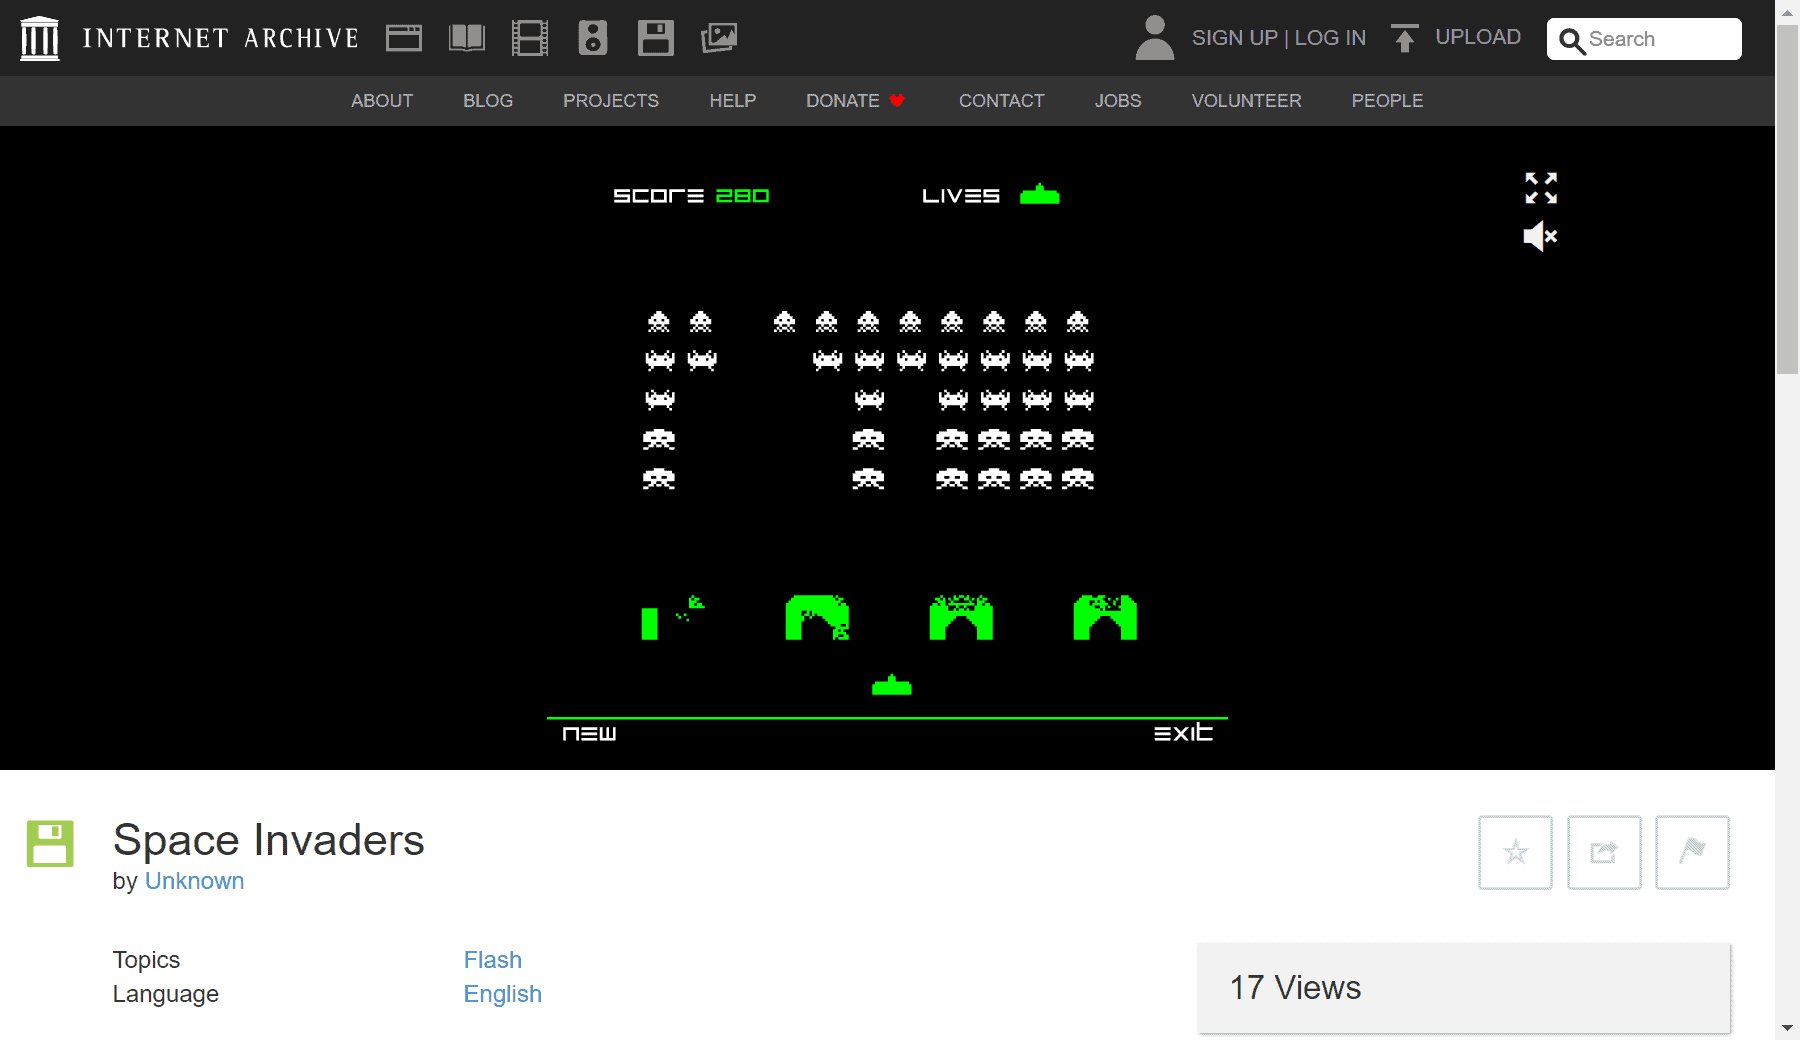 You can now play Flash content on the Internet Archive using